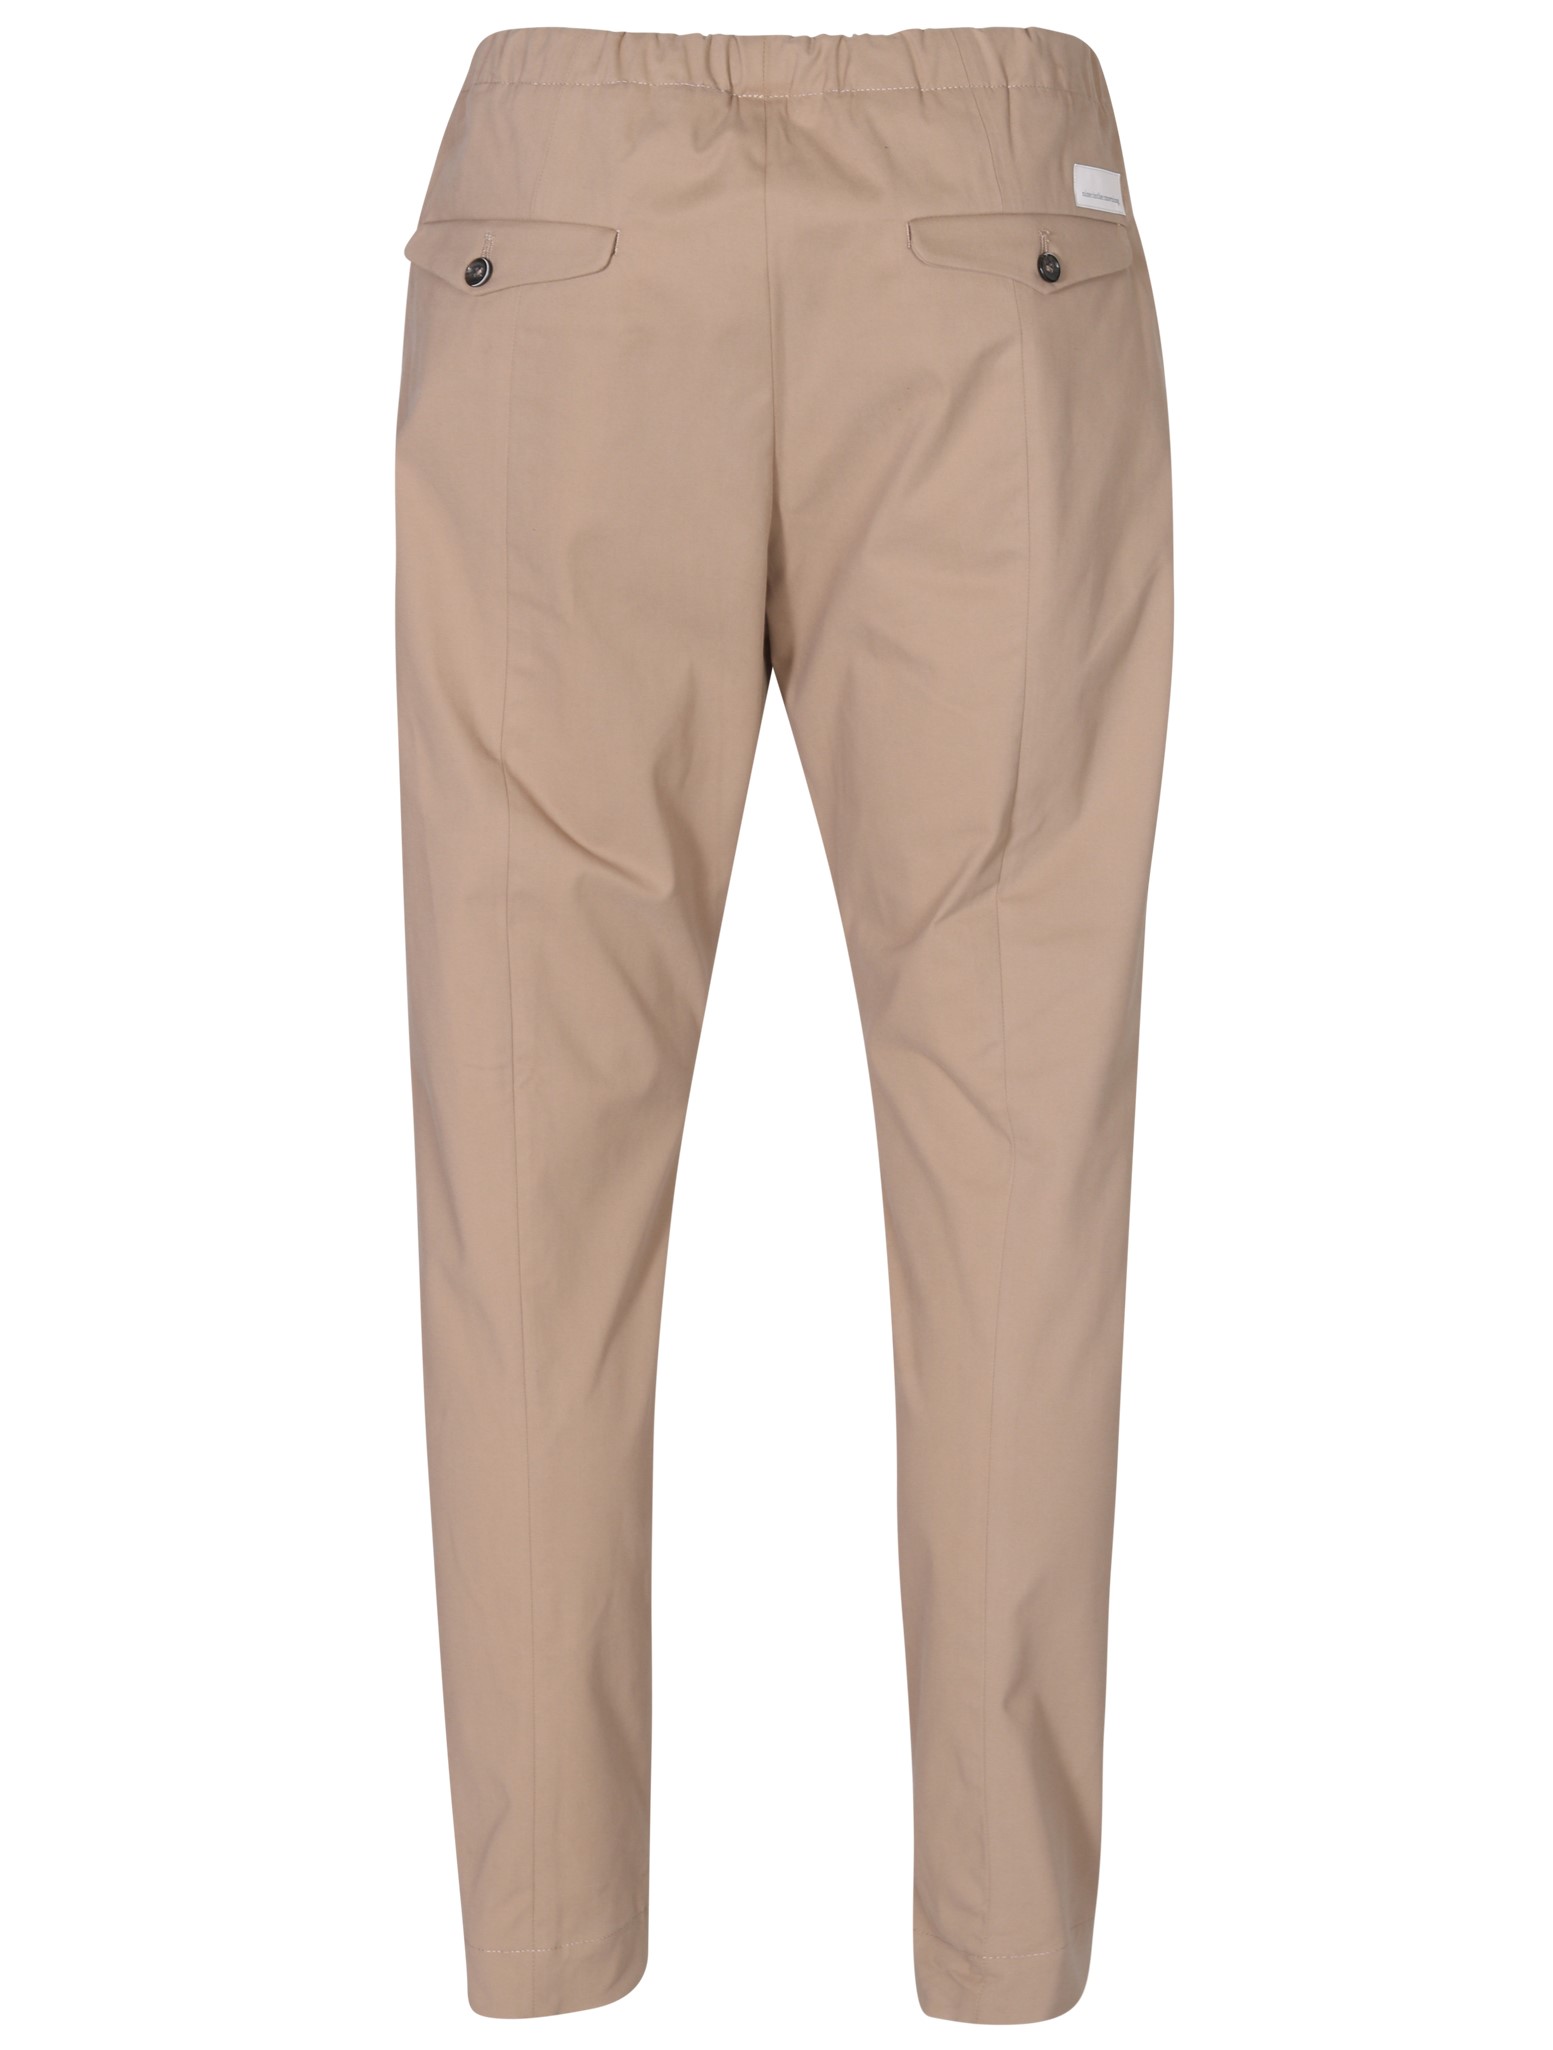 NINE:INTHE:MORNING Mirco Carrot Cotton Stretch Pant in Beige 54